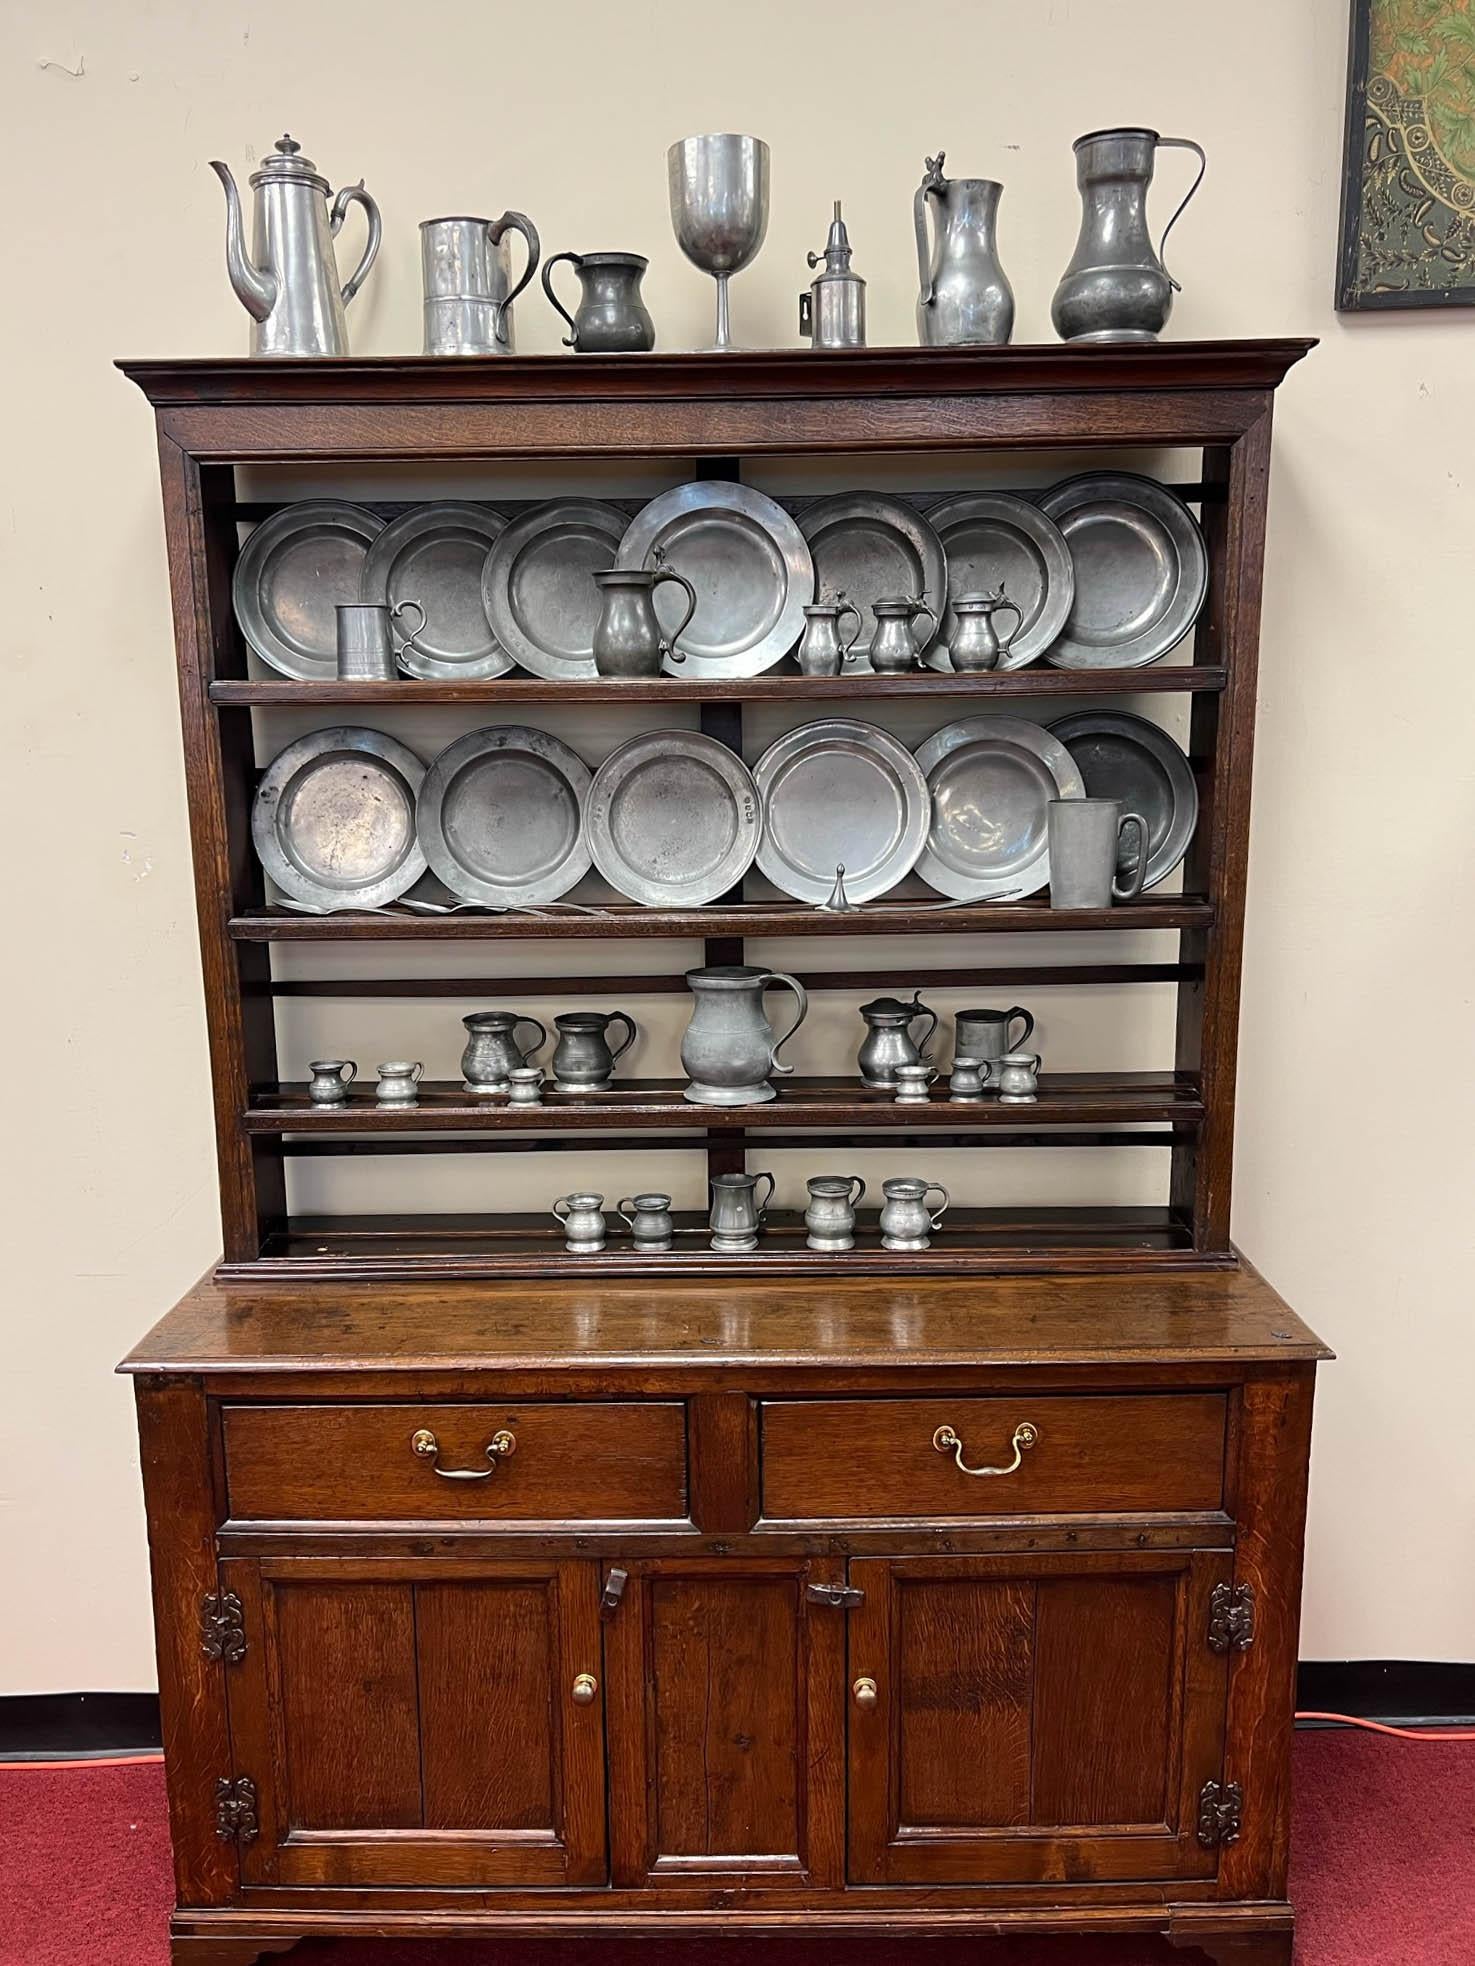 This 19th Century Colonial walnut hutch is in its original condition. The hutch consists of 2 pieces (an upper shelving piece and a lower cabinet). The above open setback shelving features four display levels; the lower cabinet has two drawers and a